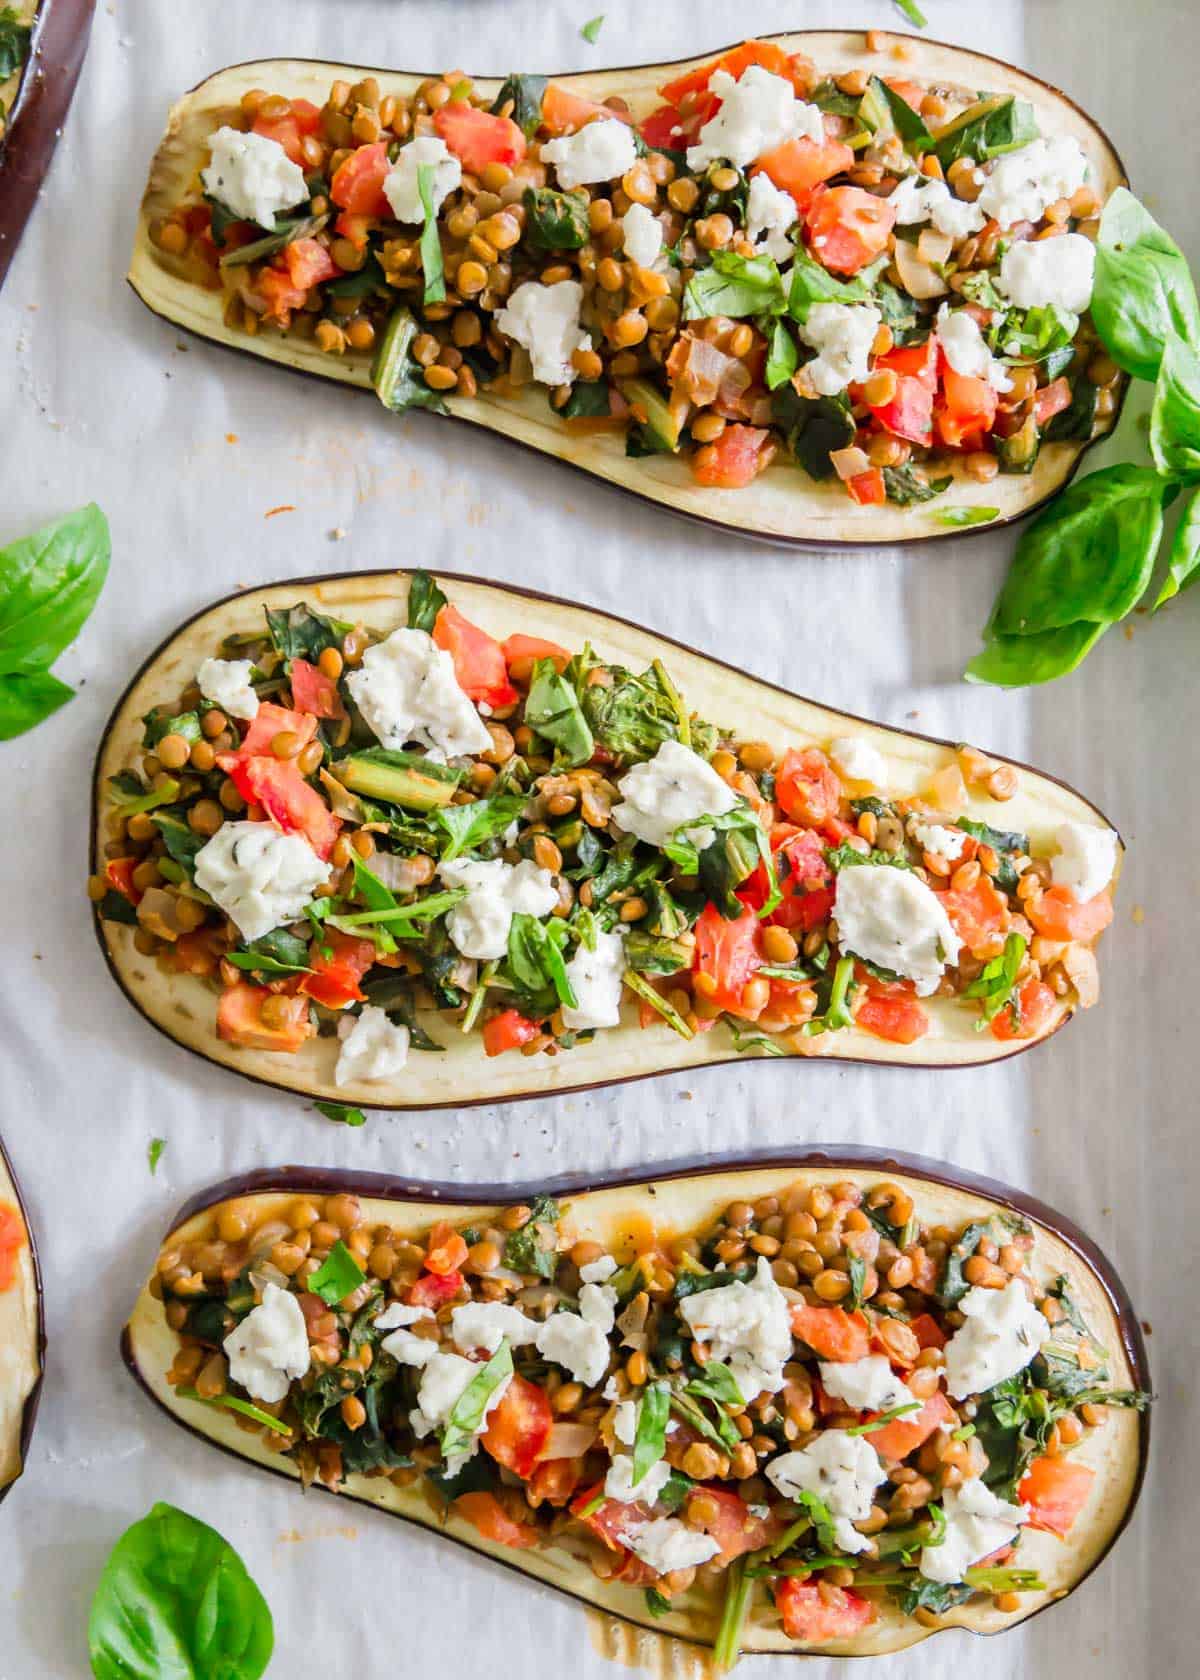 Lentil stuffed eggplant is a hearty meatless meal filled with brown lentils, tomatoes, onions and greens. Top with goat cheese for a creamy bite or leave off for a vegan version.